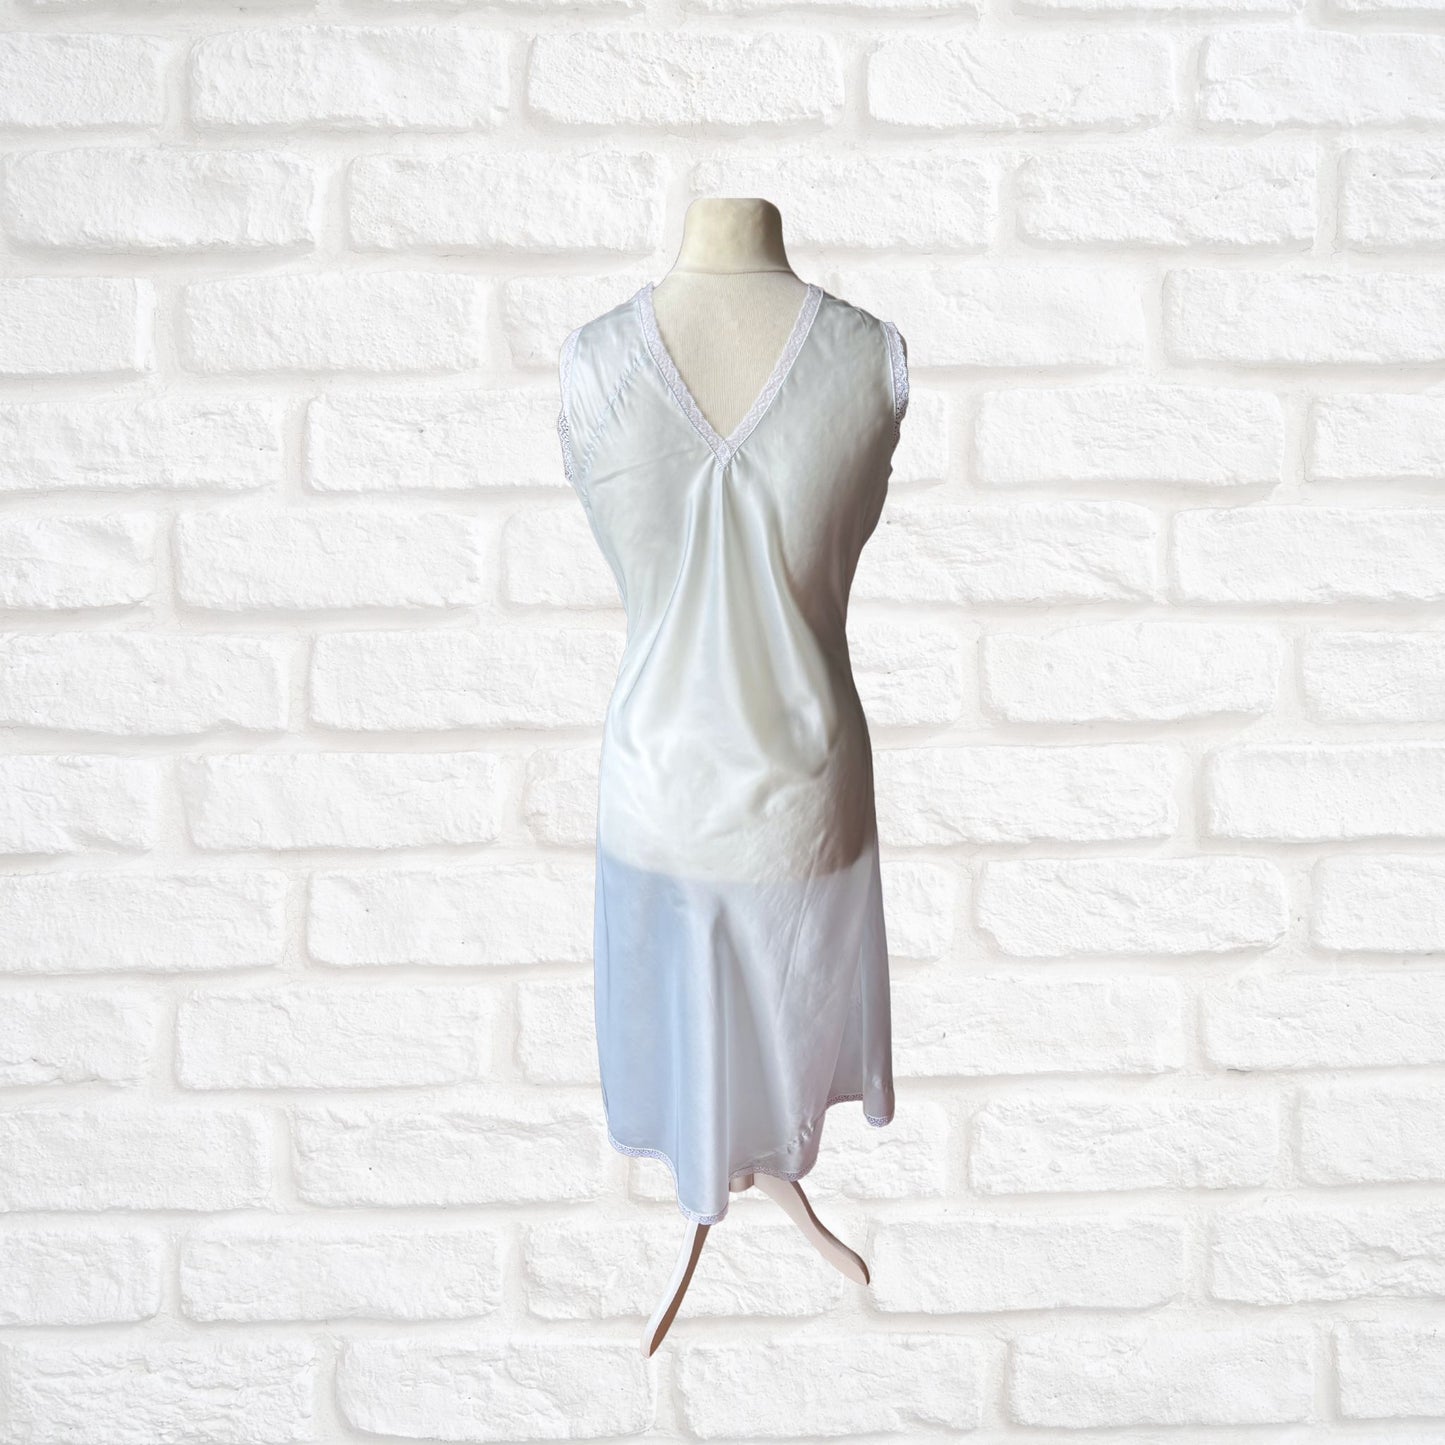 Ice Blue Silky Satin Vintage Slip Dress with Lace Ruffled Bodice. Approx UK size 10-14